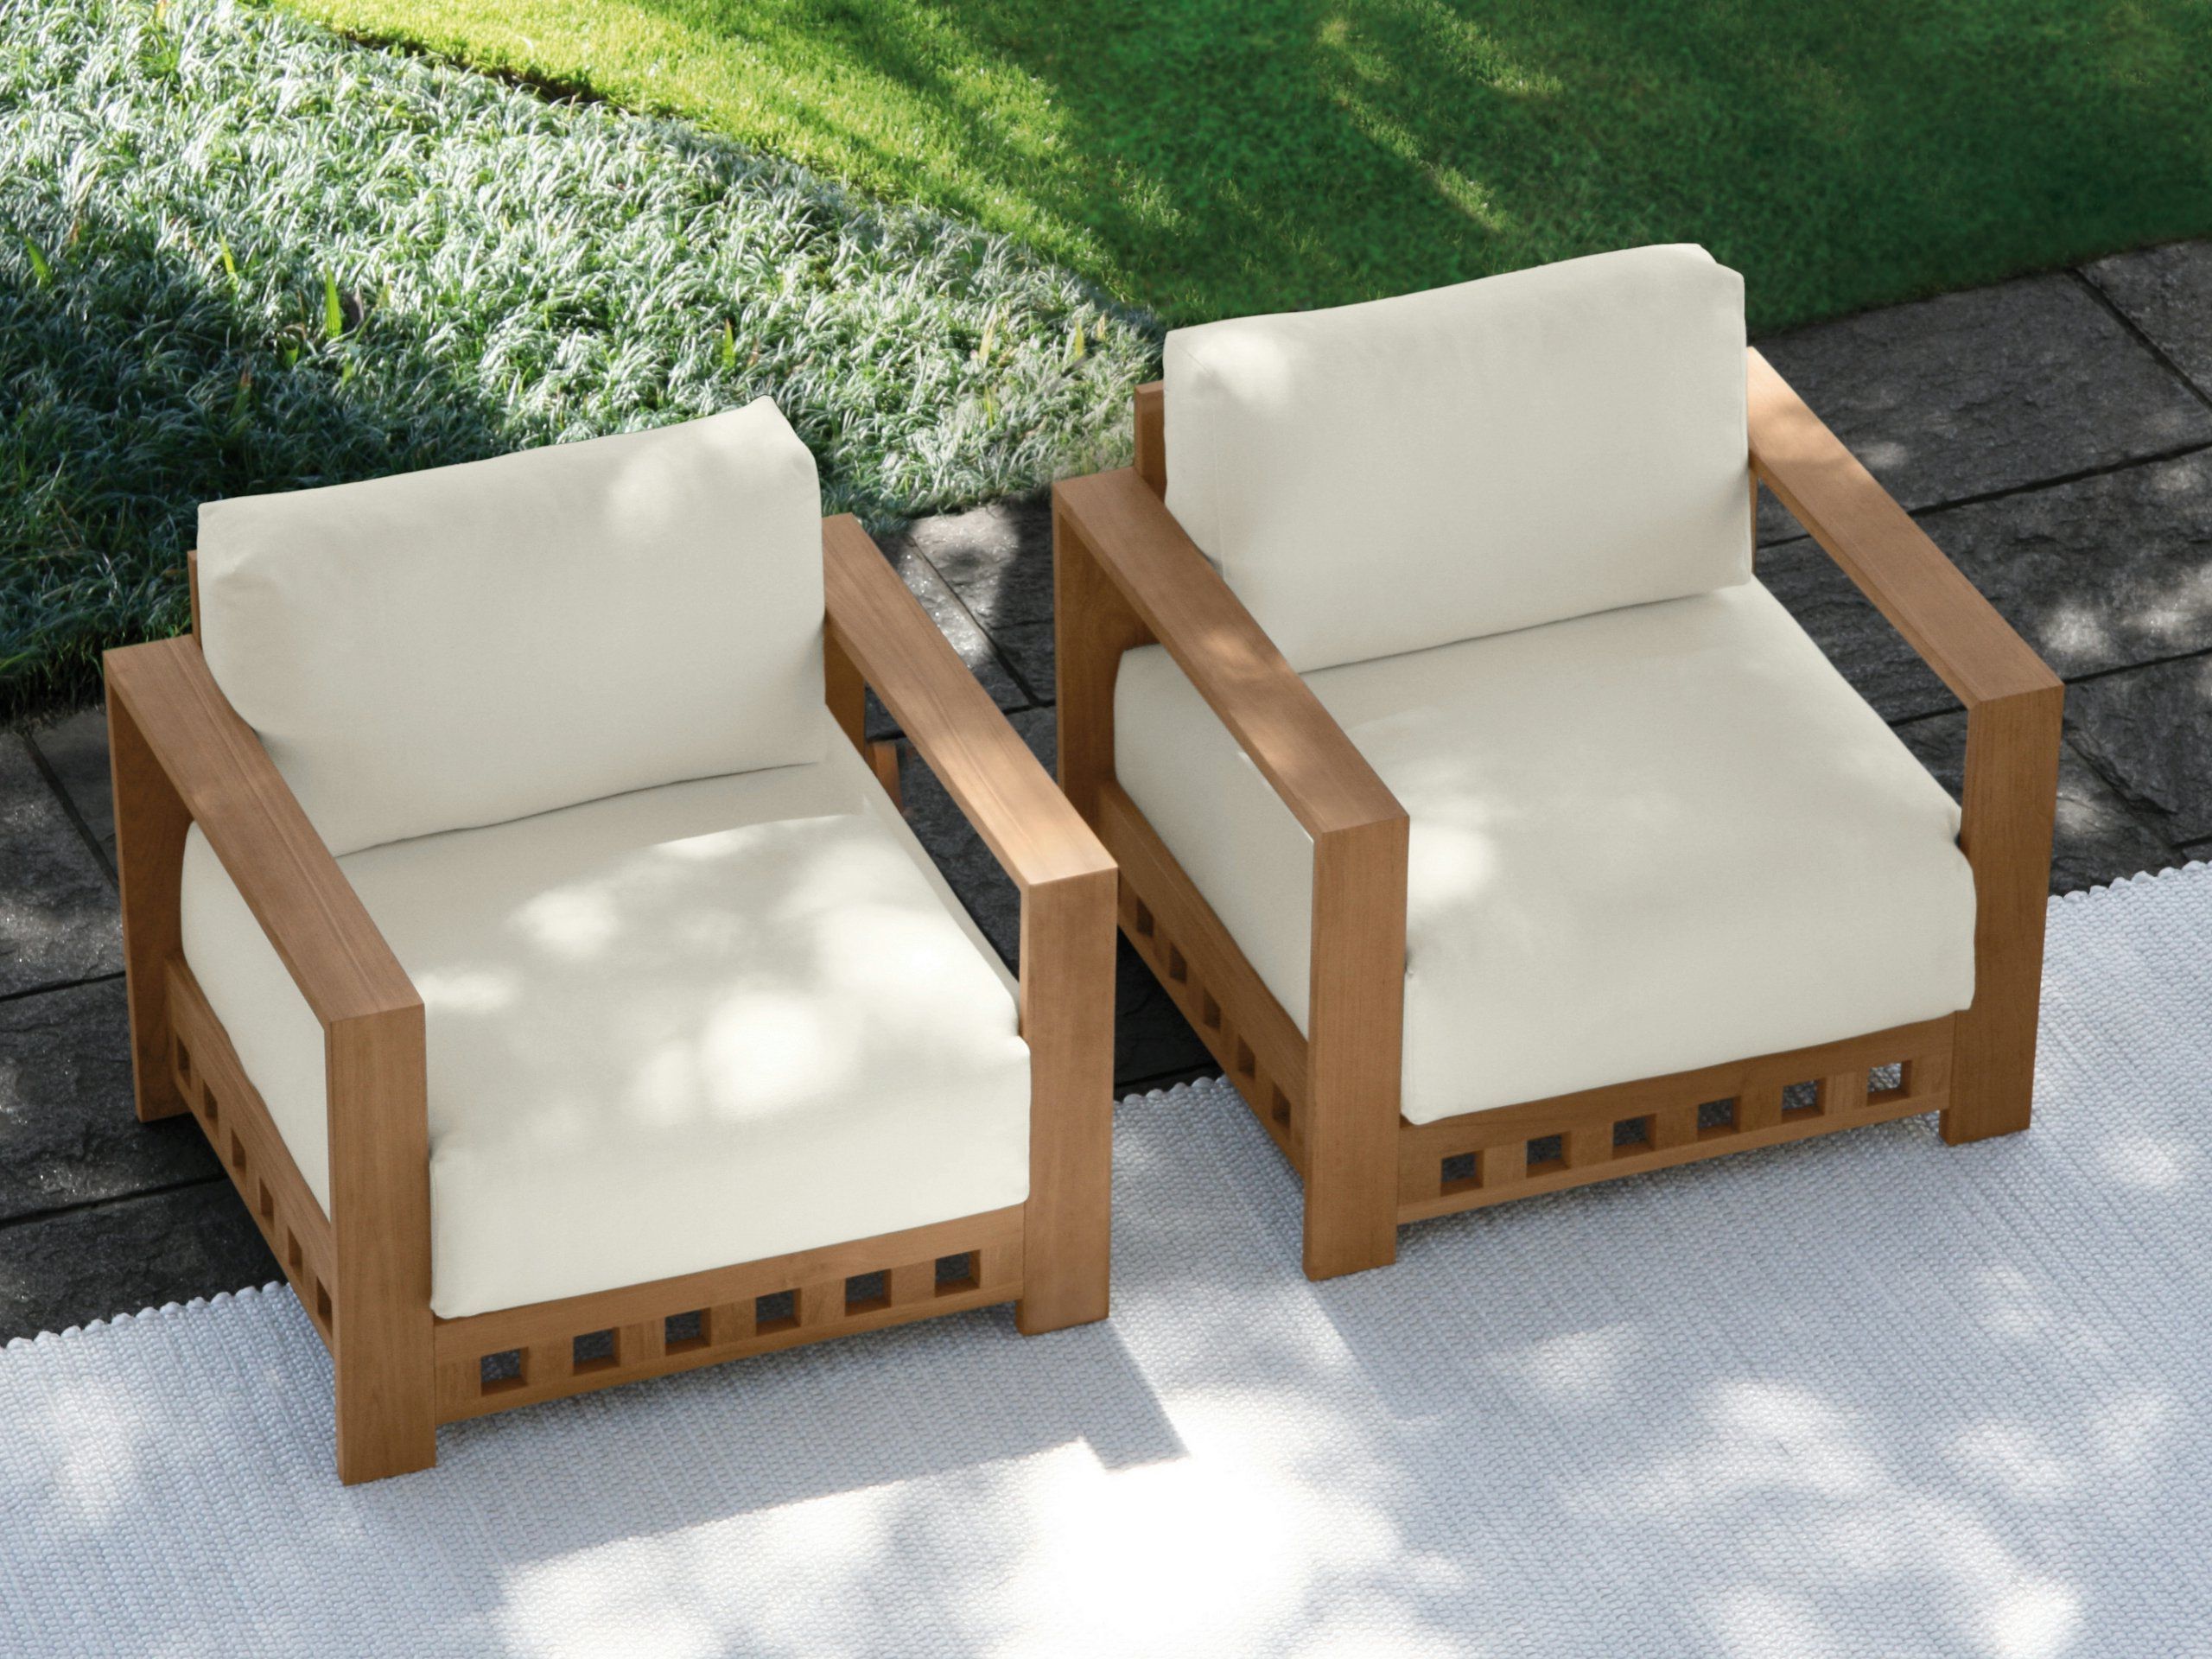 Widely Used Teak Outdoor Armchairs Inside Teak Garden Armchair With Armrests Square Square Collection (View 11 of 15)